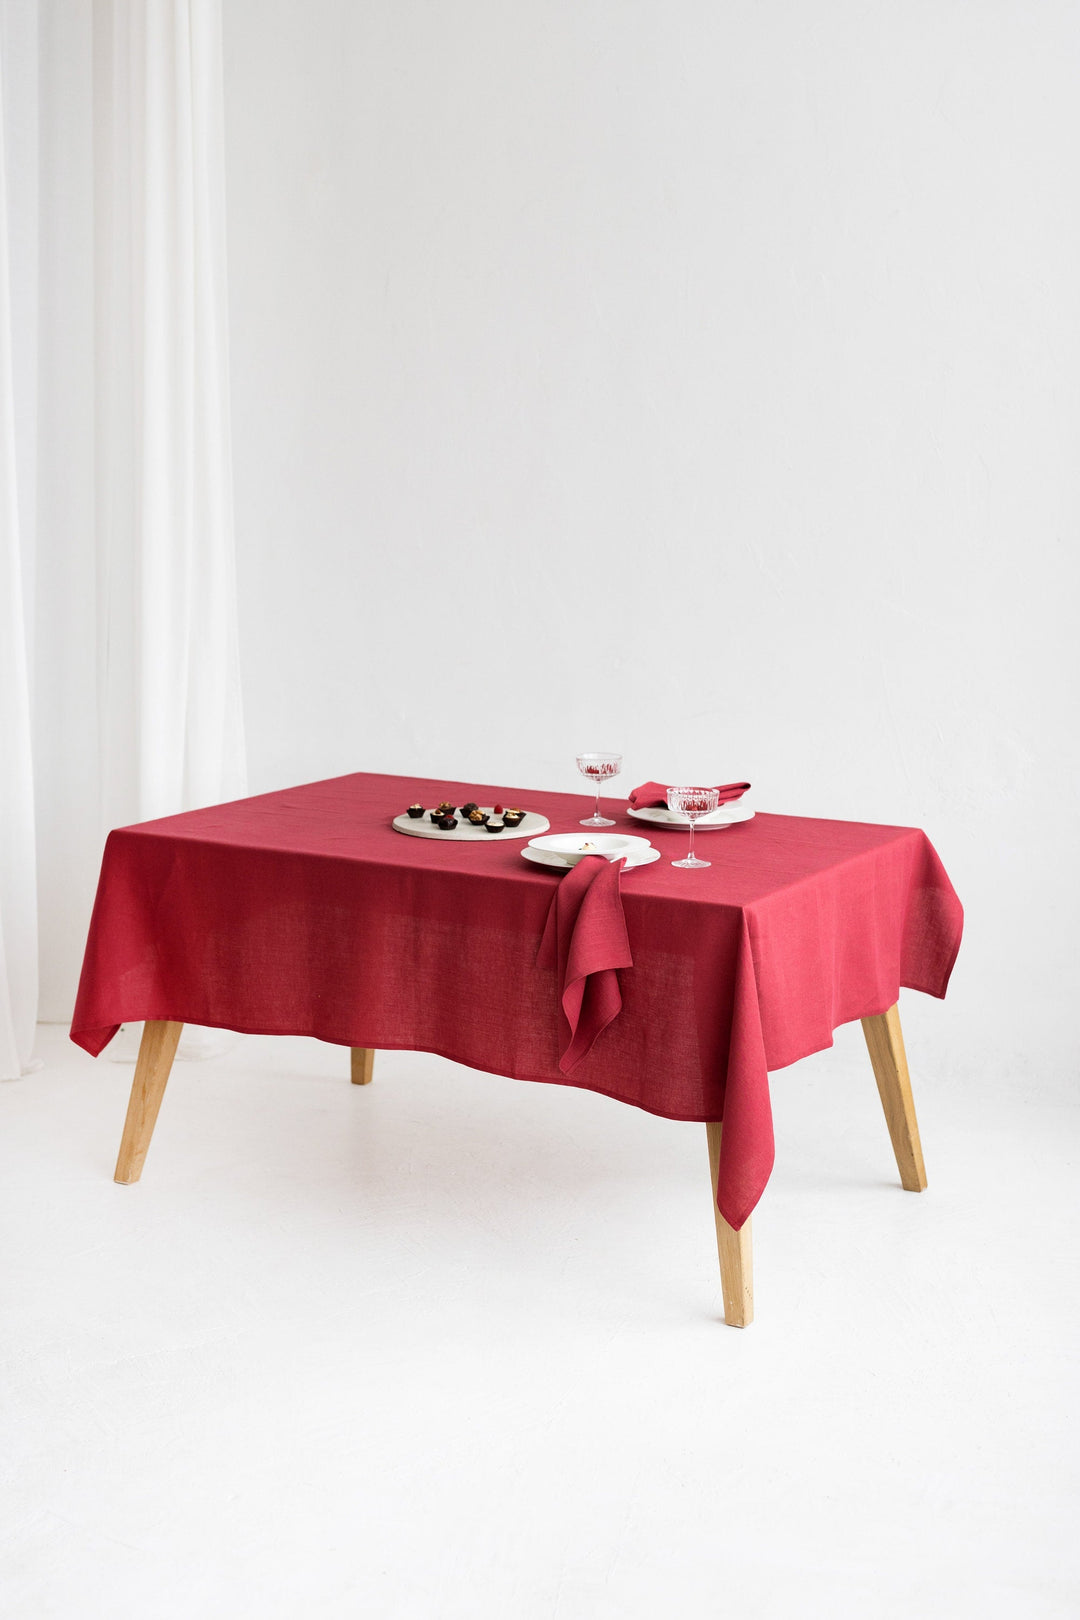 Linen Tablecloth In Raspberry Color Served On Table - Daily Linen